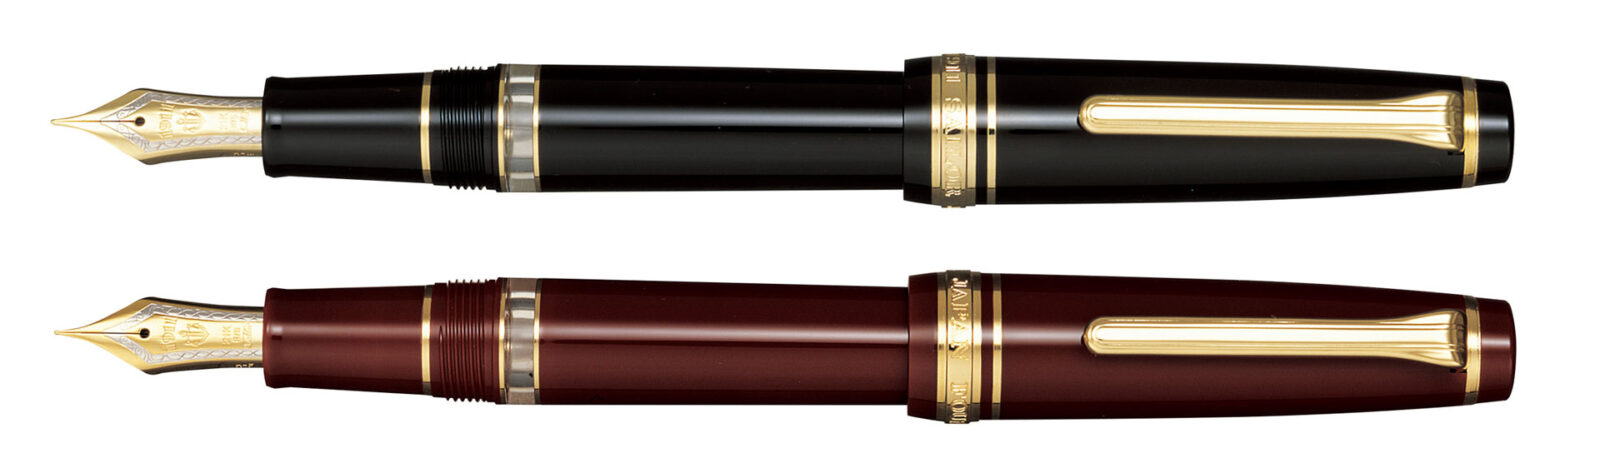 Kb10 Sailor 11-1221-220 Fountain Pen Professional Slim Gold Fine With Converter for sale online 